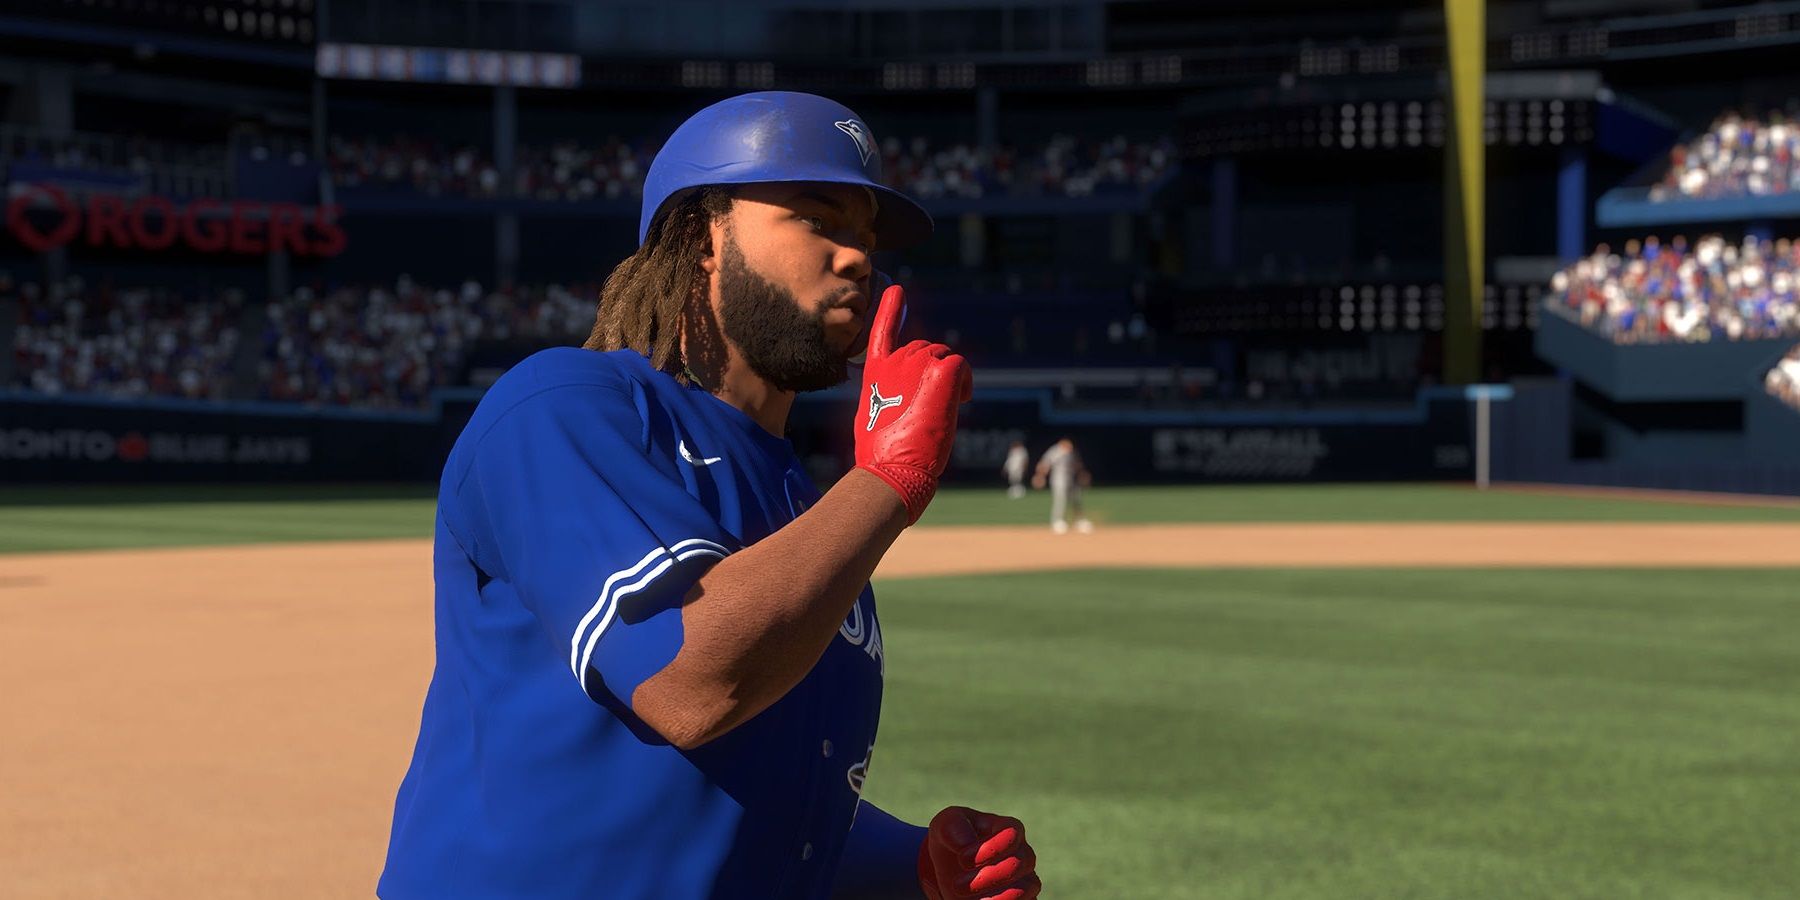 Mlb the show 24